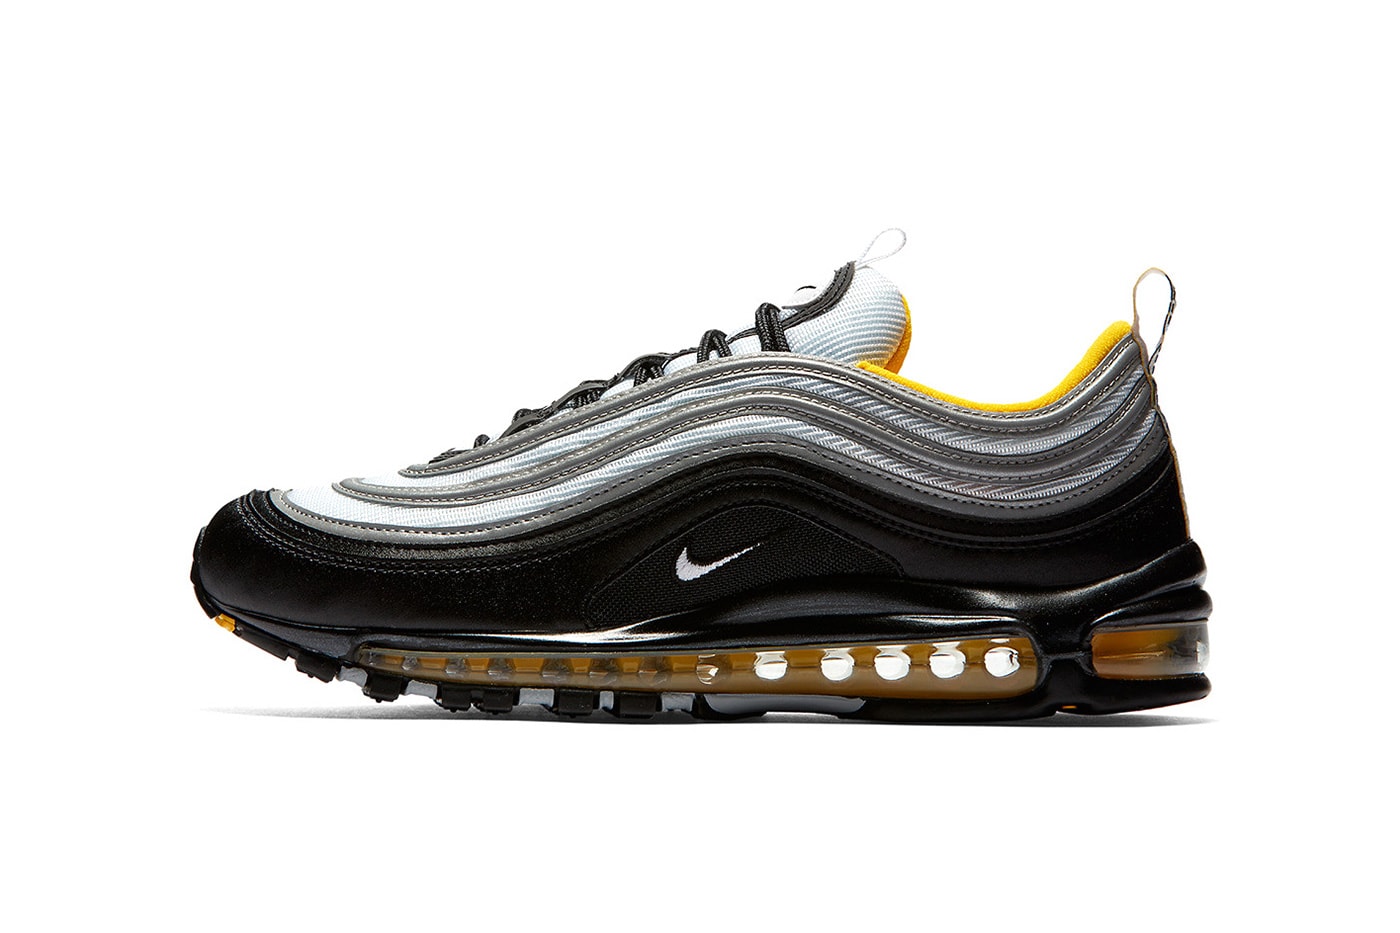 Nike Air Max 97 in Black, White, Yellow Runners AM97